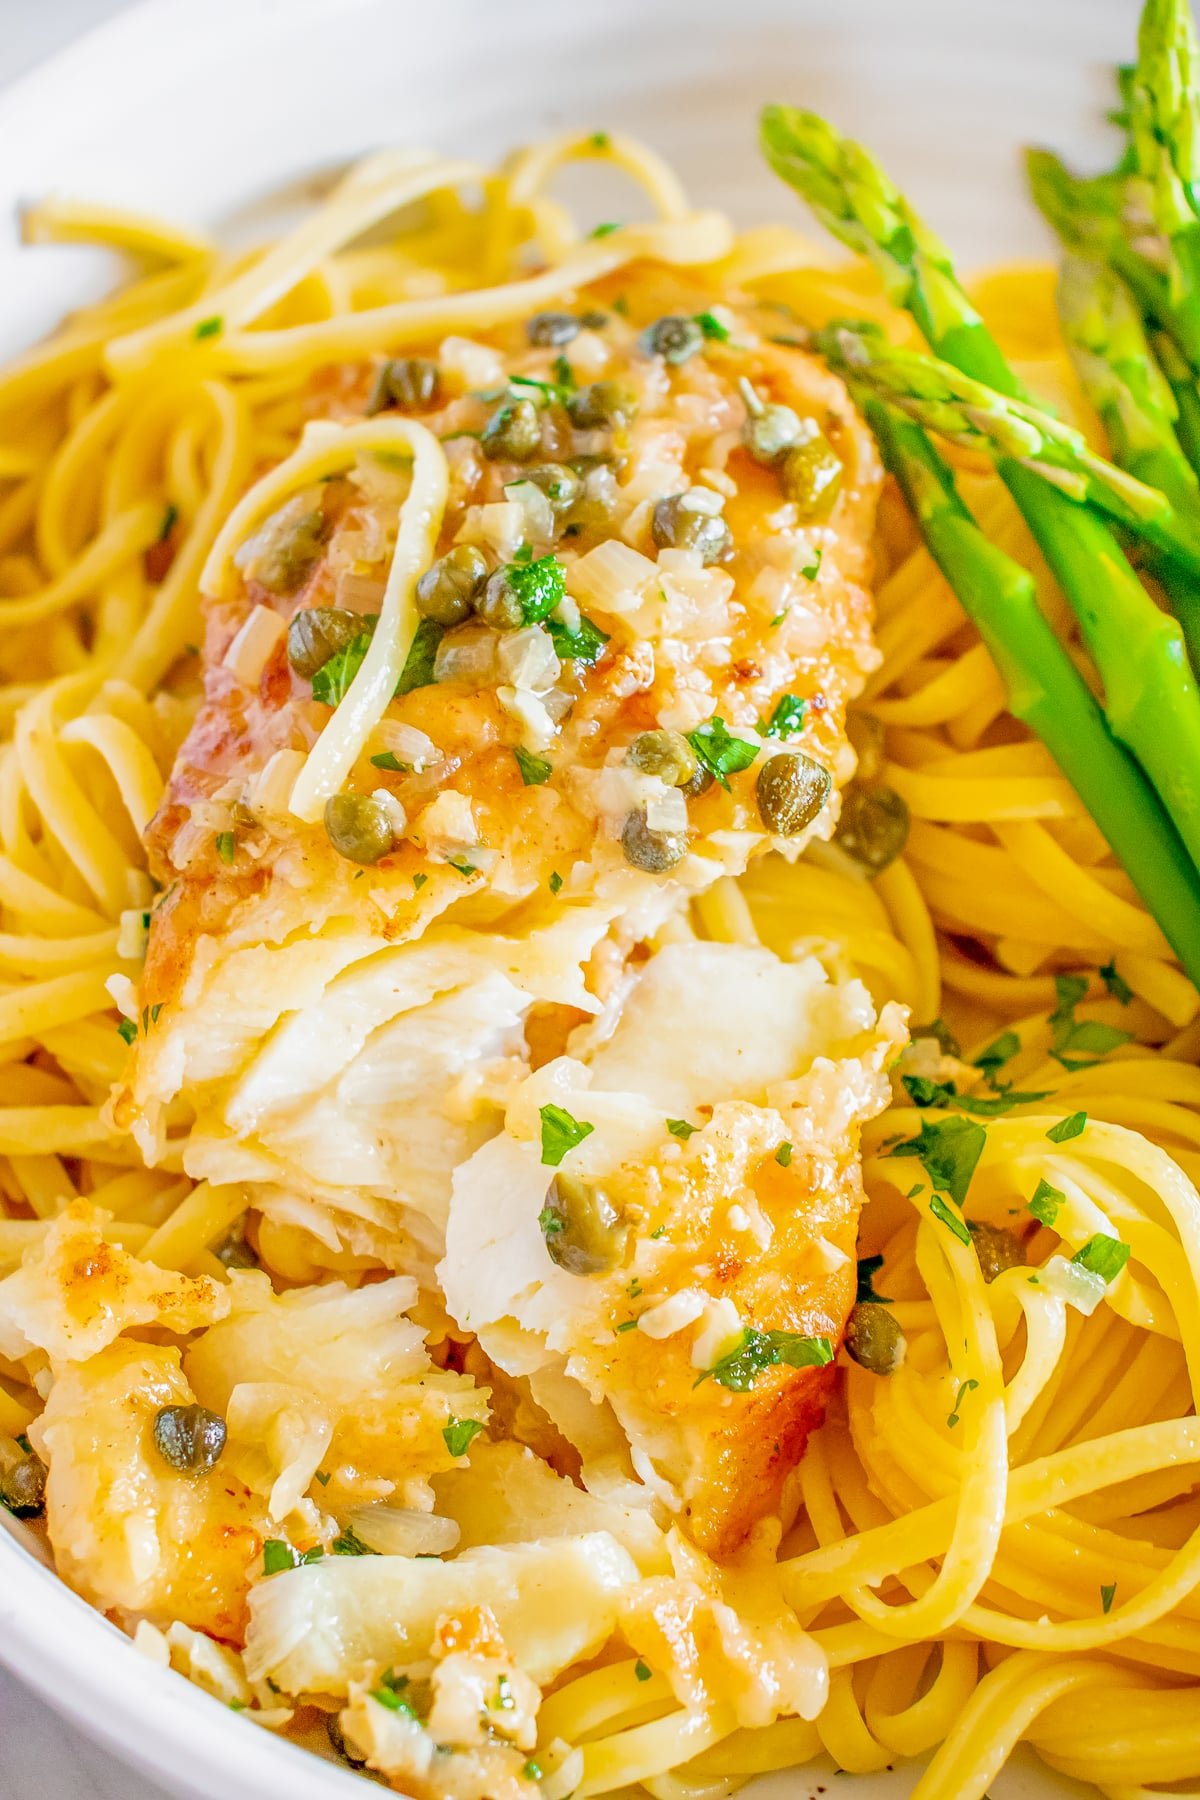 Fish piccata on a bed of pasta, flaked fish showing interior with a side of asparagus